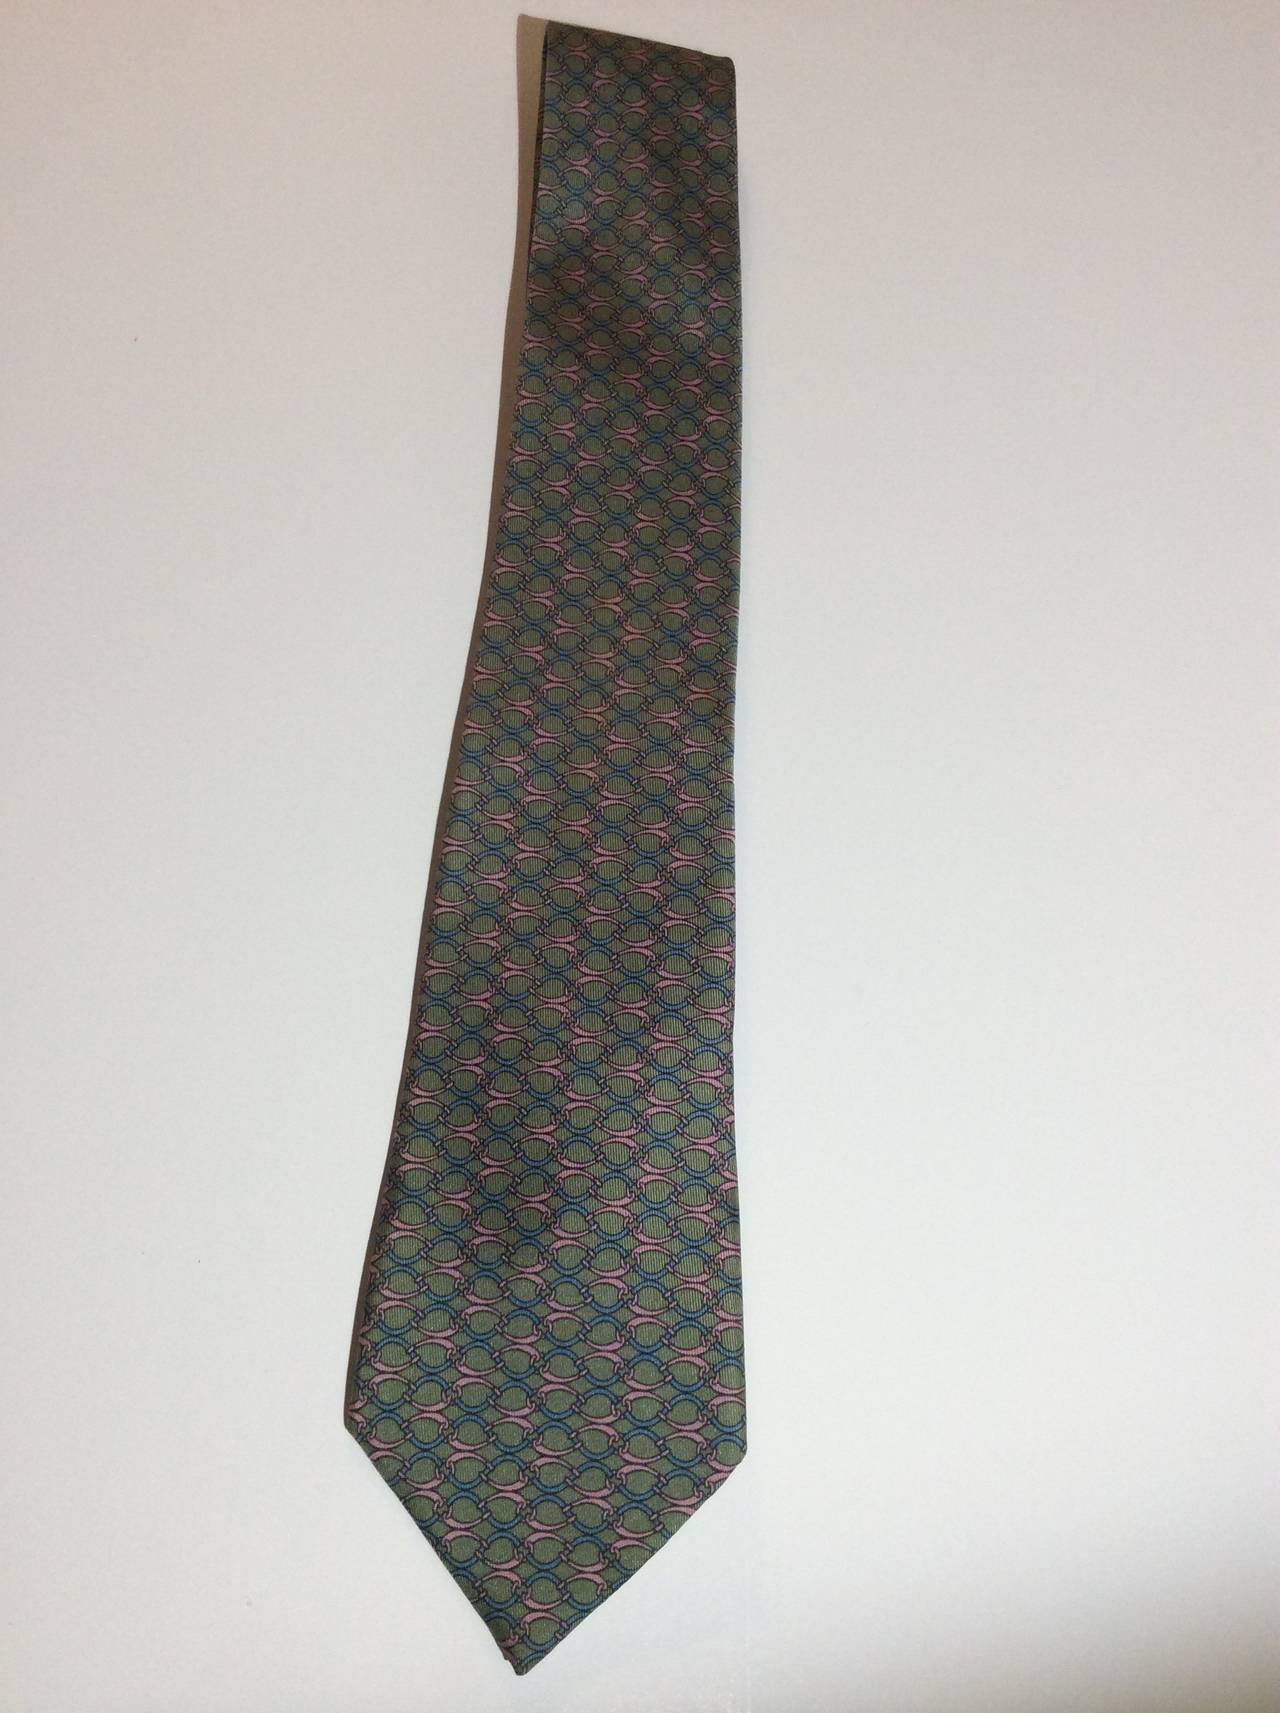 Hermes Equestrian Geometric 7145 FA Silk Tie with blue, pink and olive.